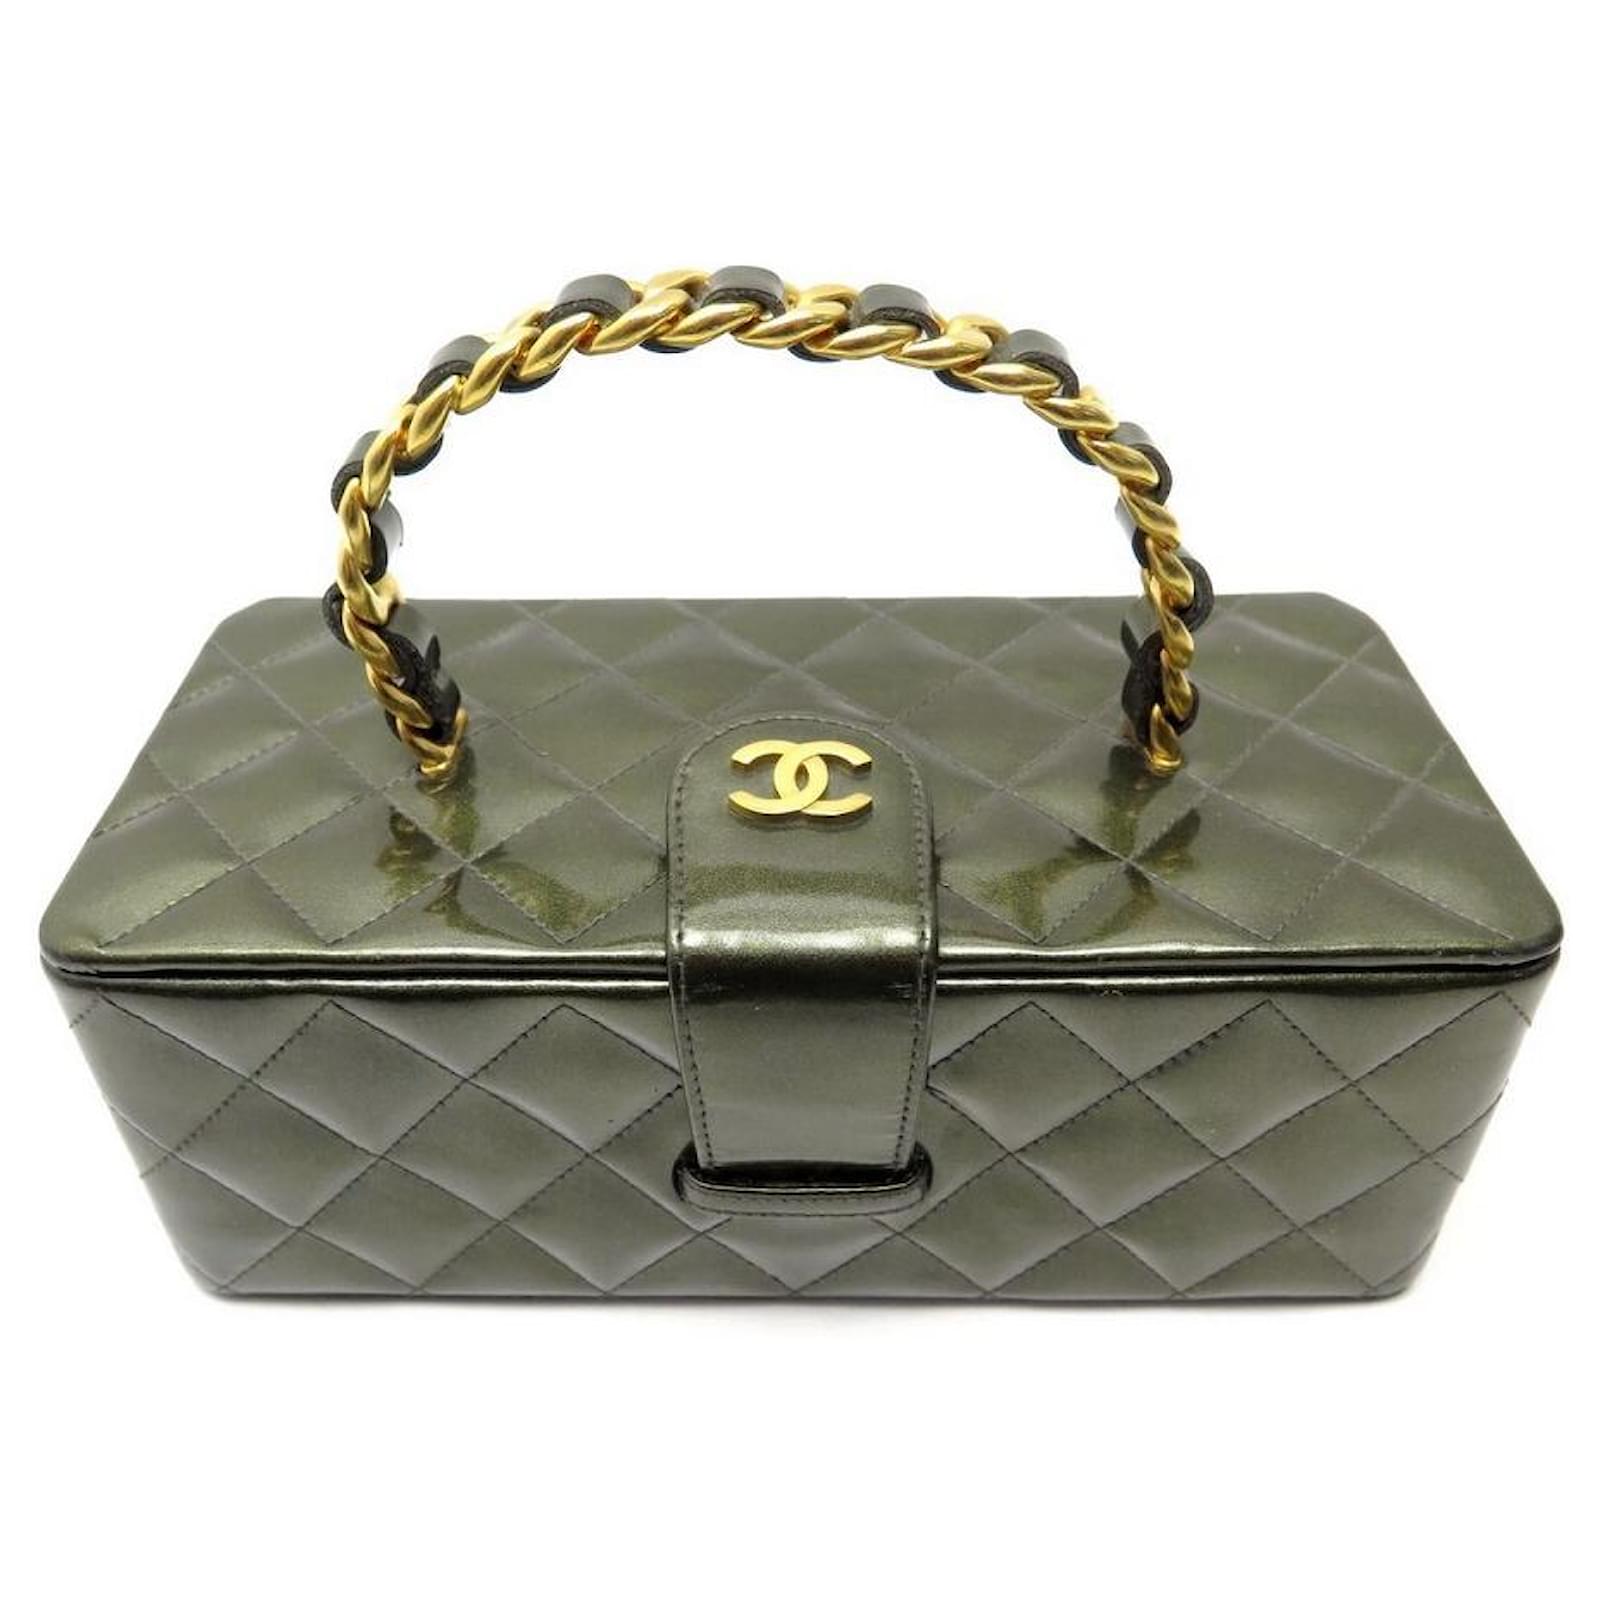 VINTAGE CHANEL VANITY TOILETRY BAG IN PATENT QUILTED LEATHER CASE